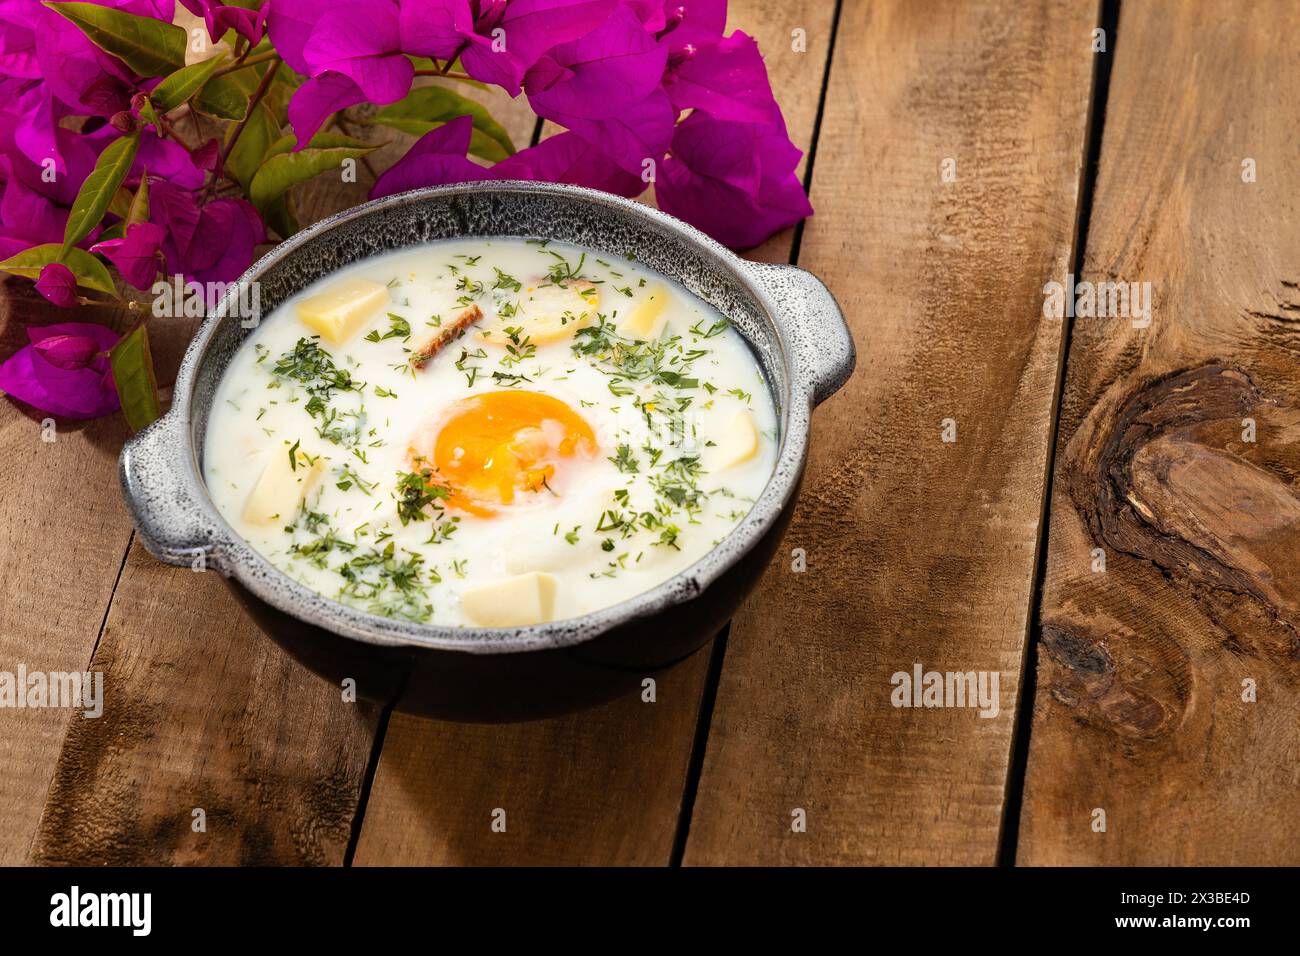 Changua - Egg with milk, typical soup for breakfast in Bogota Stock Photo